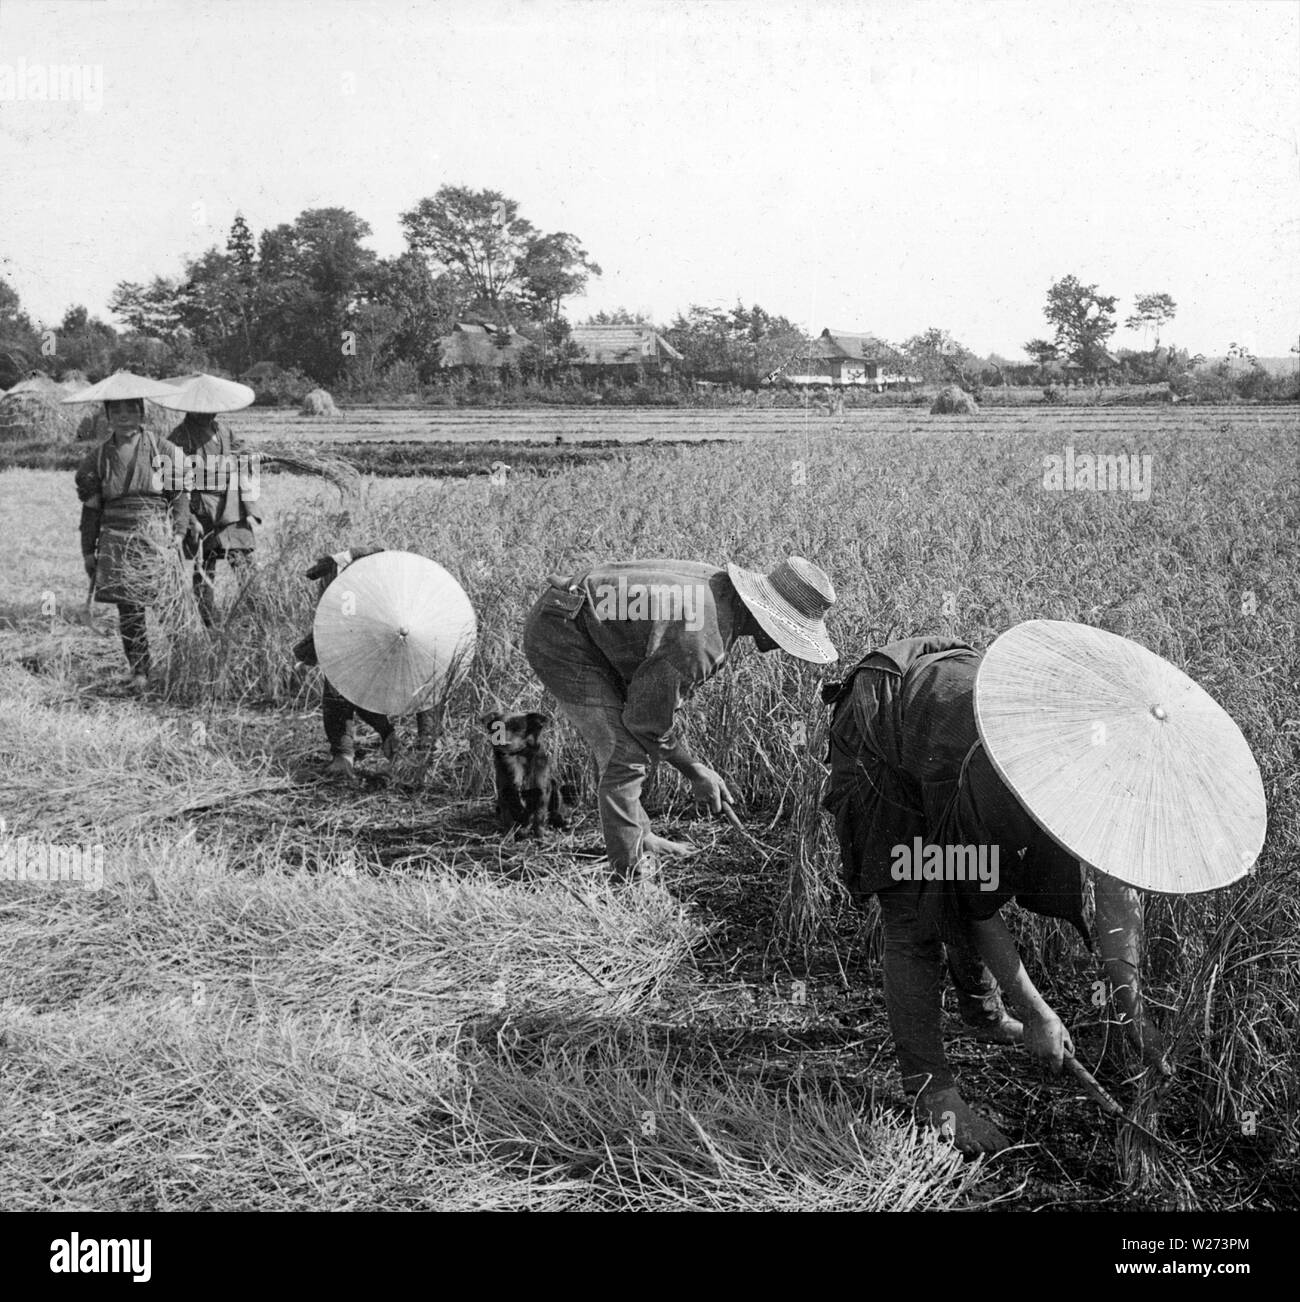 [ 1900s Japan - Japanese Farmers Harvesting Rice ] —   Japanese farmers cutting rice with a sickle in a rice field. Early 1900s.  20th century vintage glass slide. Stock Photo